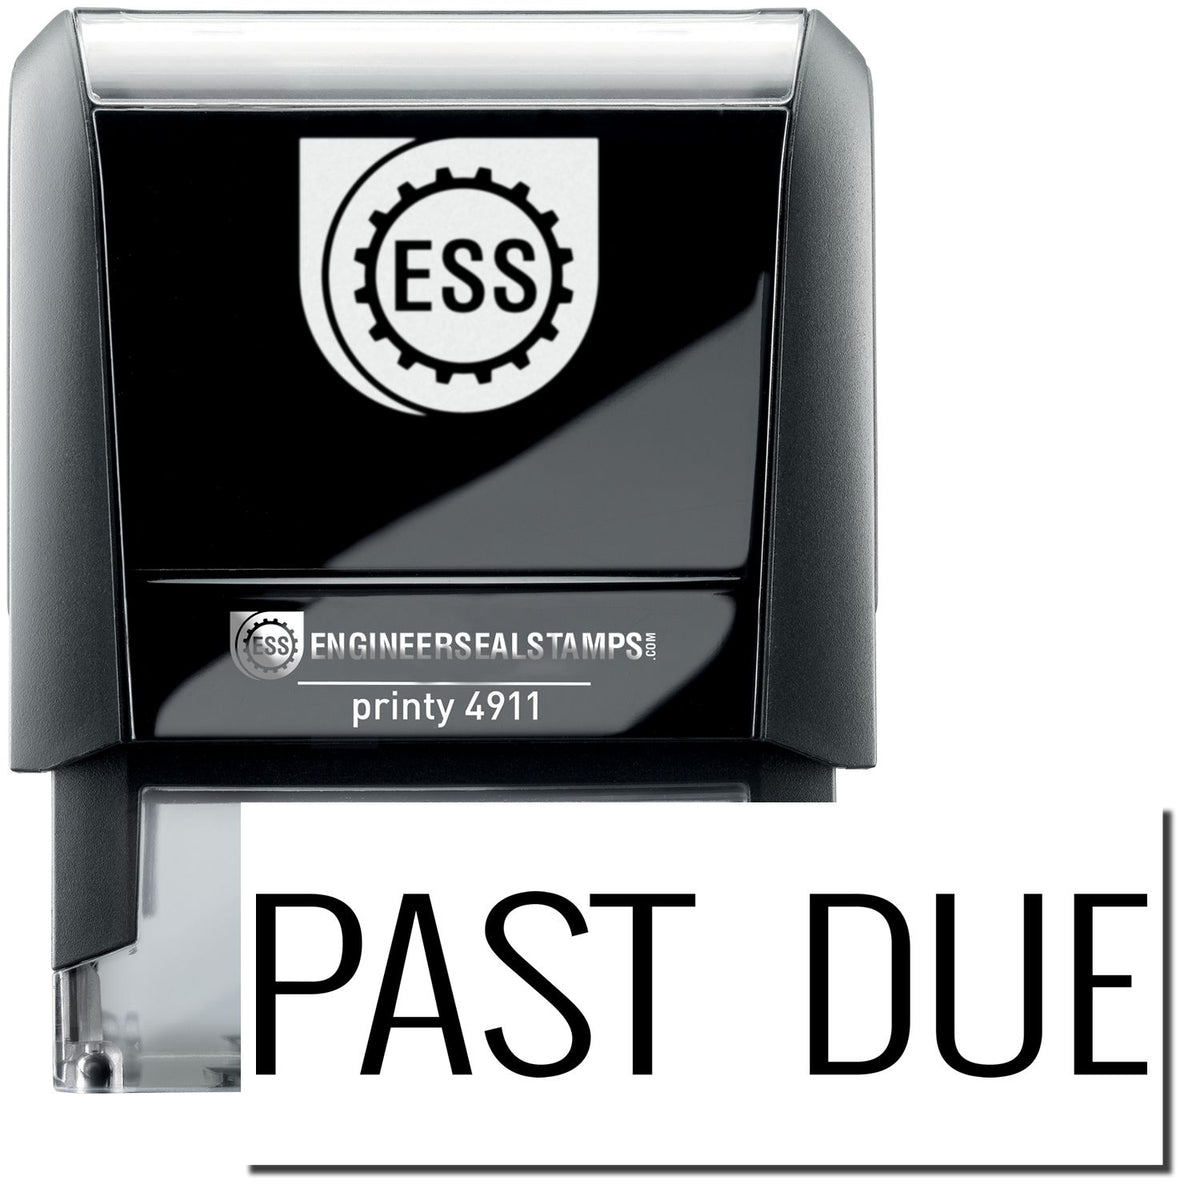 A self-inking stamp with a stamped image showing how the text &quot;PAST DUE&quot; in a narrow font is displayed after stamping.